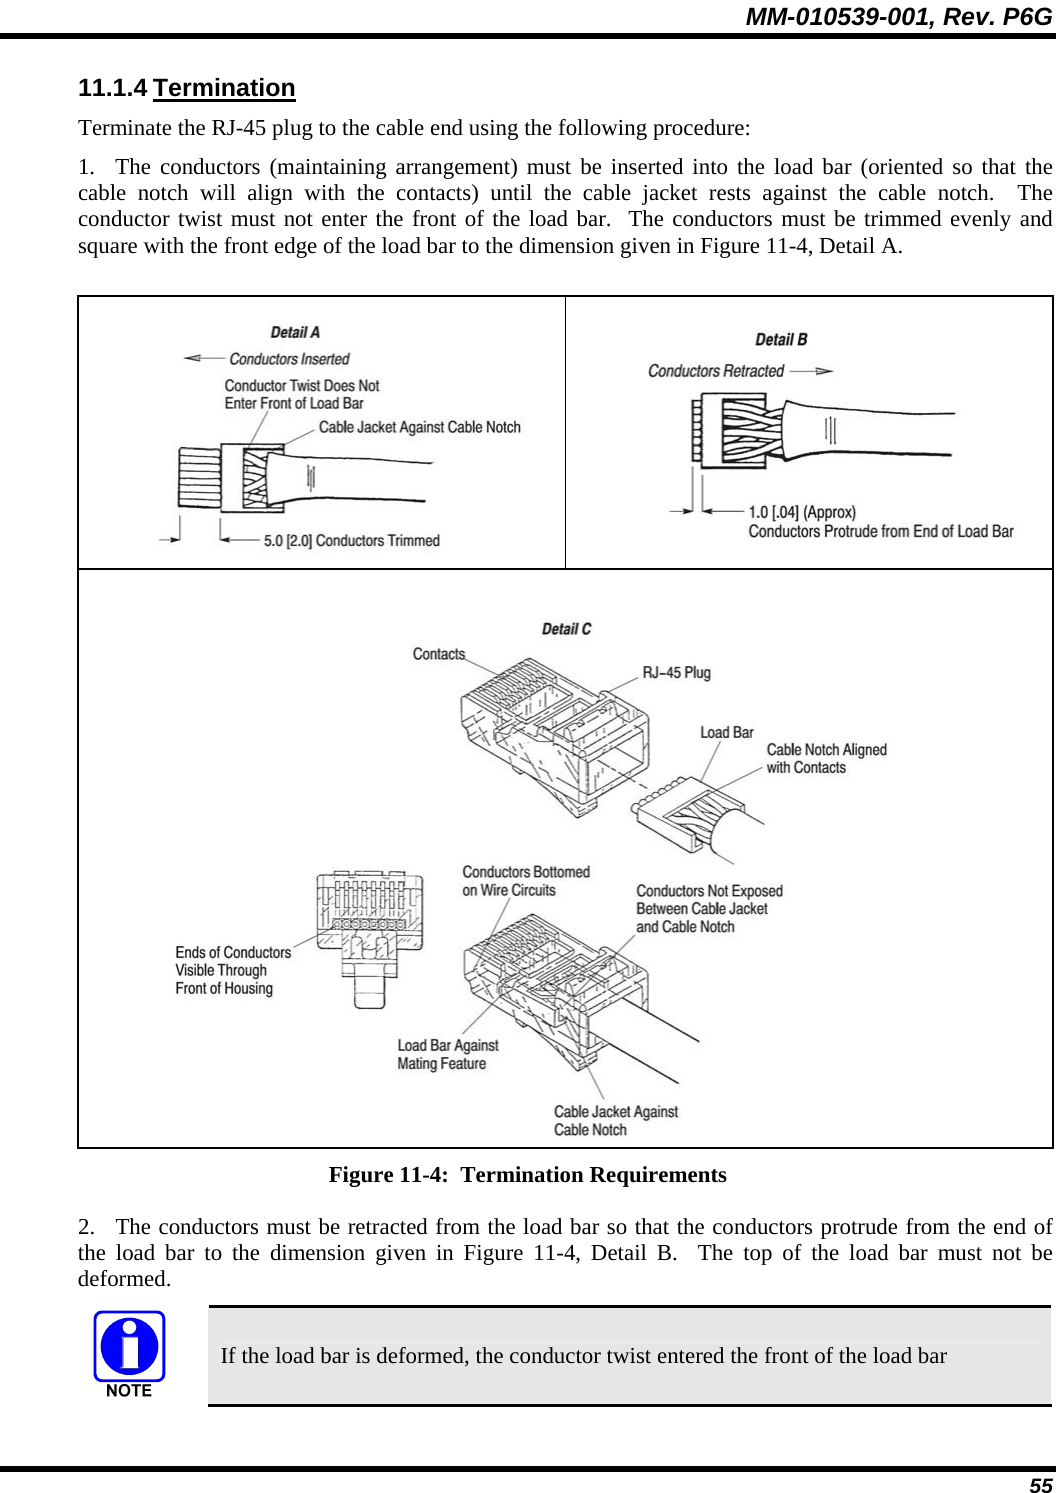 MM-010539-001, Rev. P6G  55 11.1.4 Termination Terminate the RJ-45 plug to the cable end using the following procedure: 1. The conductors (maintaining arrangement) must be inserted into the load bar (oriented so that the cable notch will align with the contacts) until the cable jacket rests against the cable notch.  The conductor twist must not enter the front of the load bar.  The conductors must be trimmed evenly and square with the front edge of the load bar to the dimension given in Figure 11-4, Detail A.     Figure 11-4:  Termination Requirements 2. The conductors must be retracted from the load bar so that the conductors protrude from the end of the load bar to the dimension given in Figure 11-4, Detail B.  The top of the load bar must not be deformed.  If the load bar is deformed, the conductor twist entered the front of the load bar 